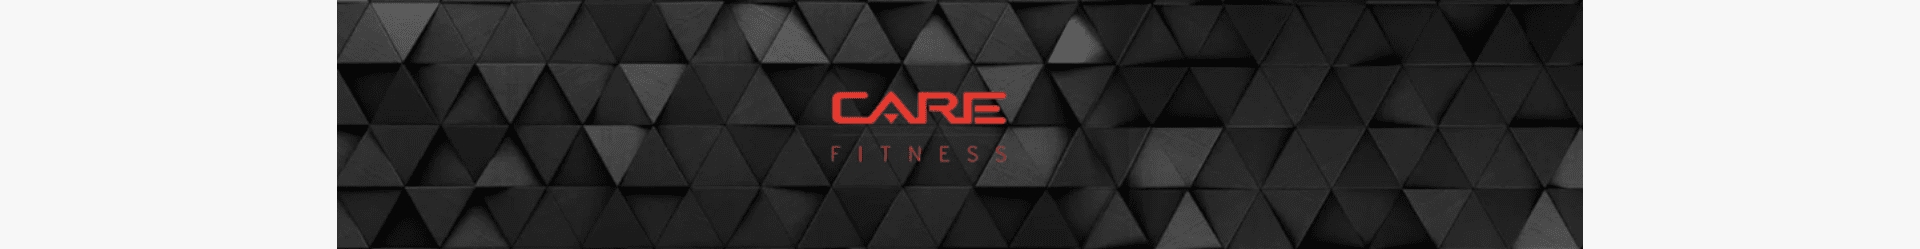 Care_Fitness